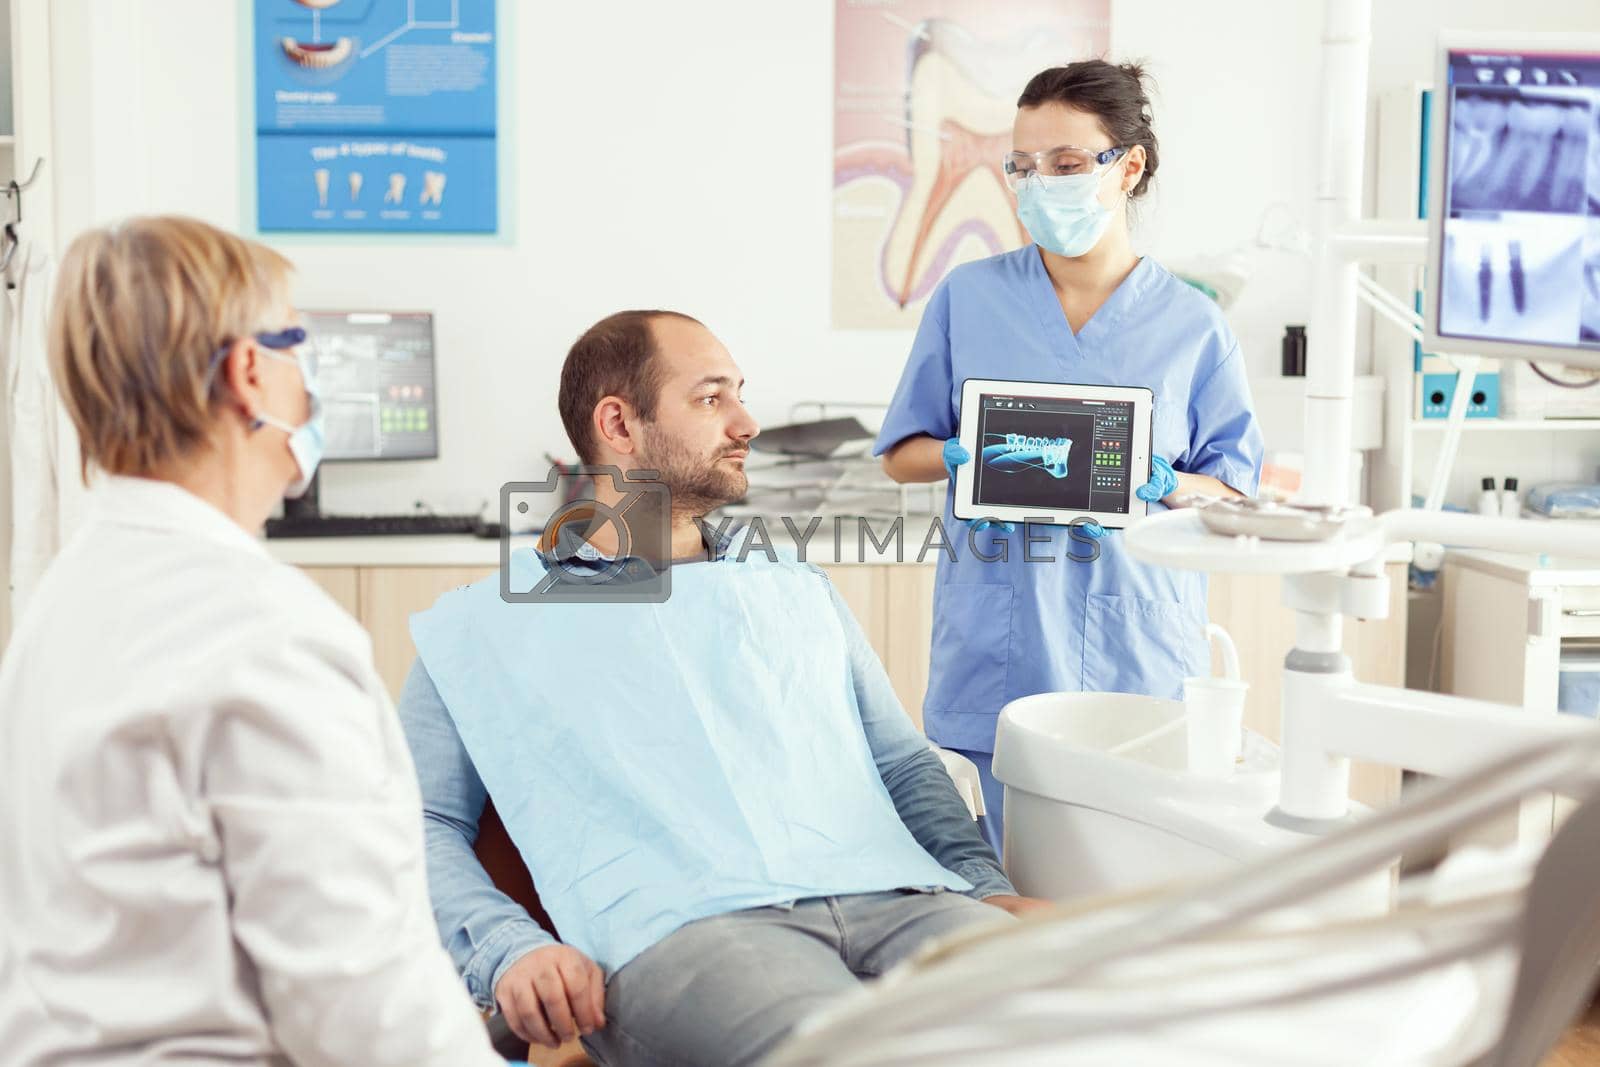 Dentist assistant showing teeth radiography on tablet pc computer screen to sick patient man at dental clinic office. Orthodontist discussing toothache treatment to prevent stomatology problems